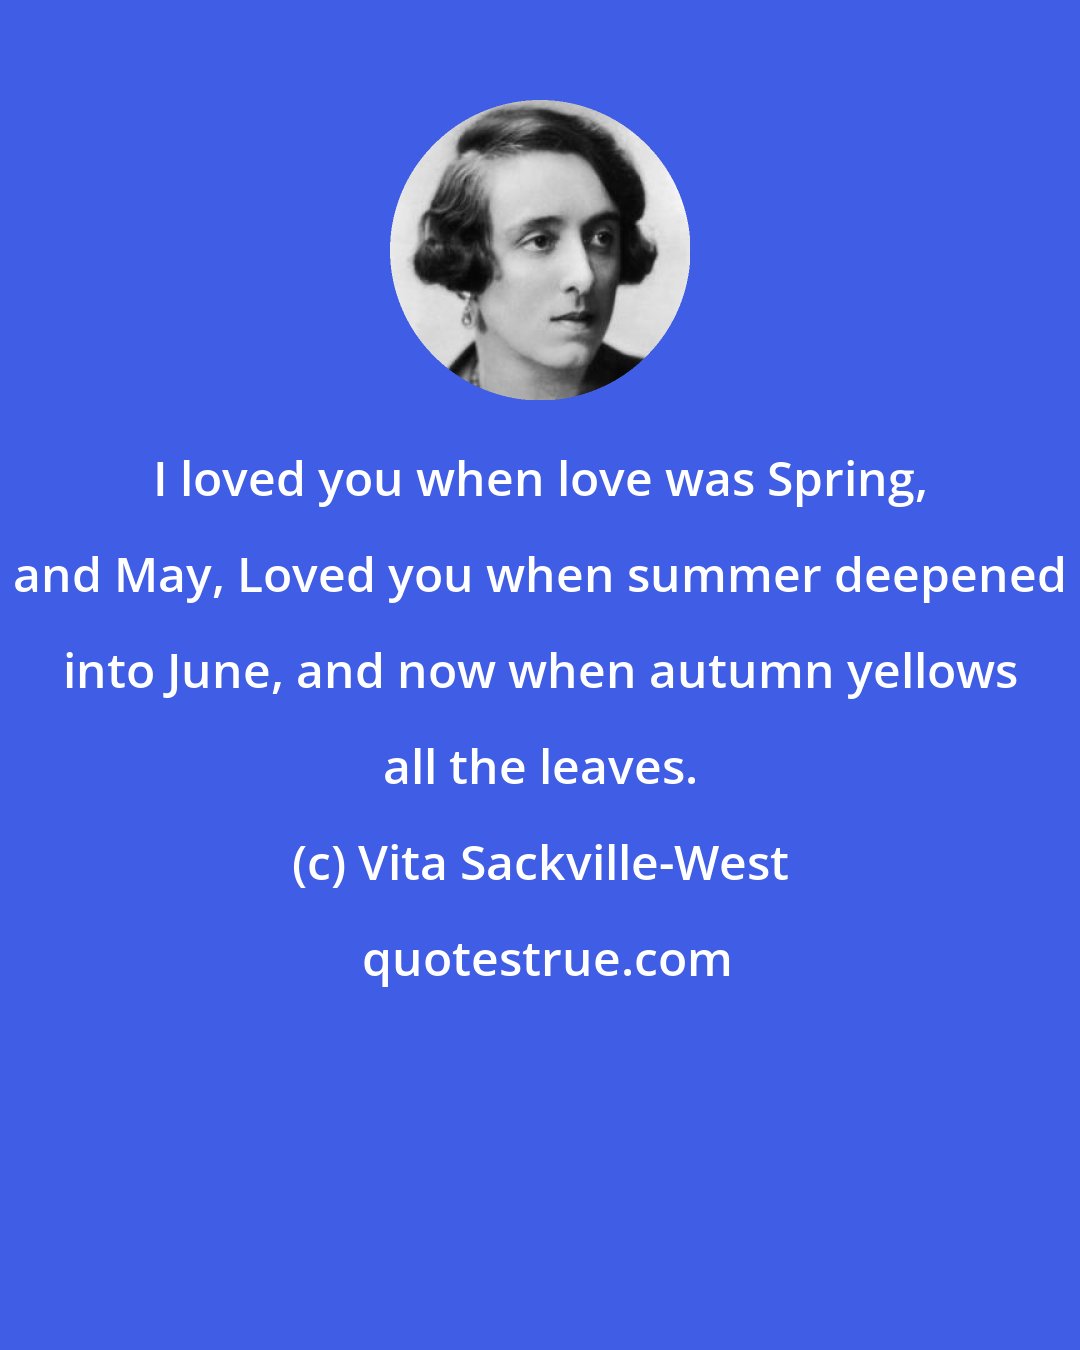 Vita Sackville-West: I loved you when love was Spring, and May, Loved you when summer deepened into June, and now when autumn yellows all the leaves.